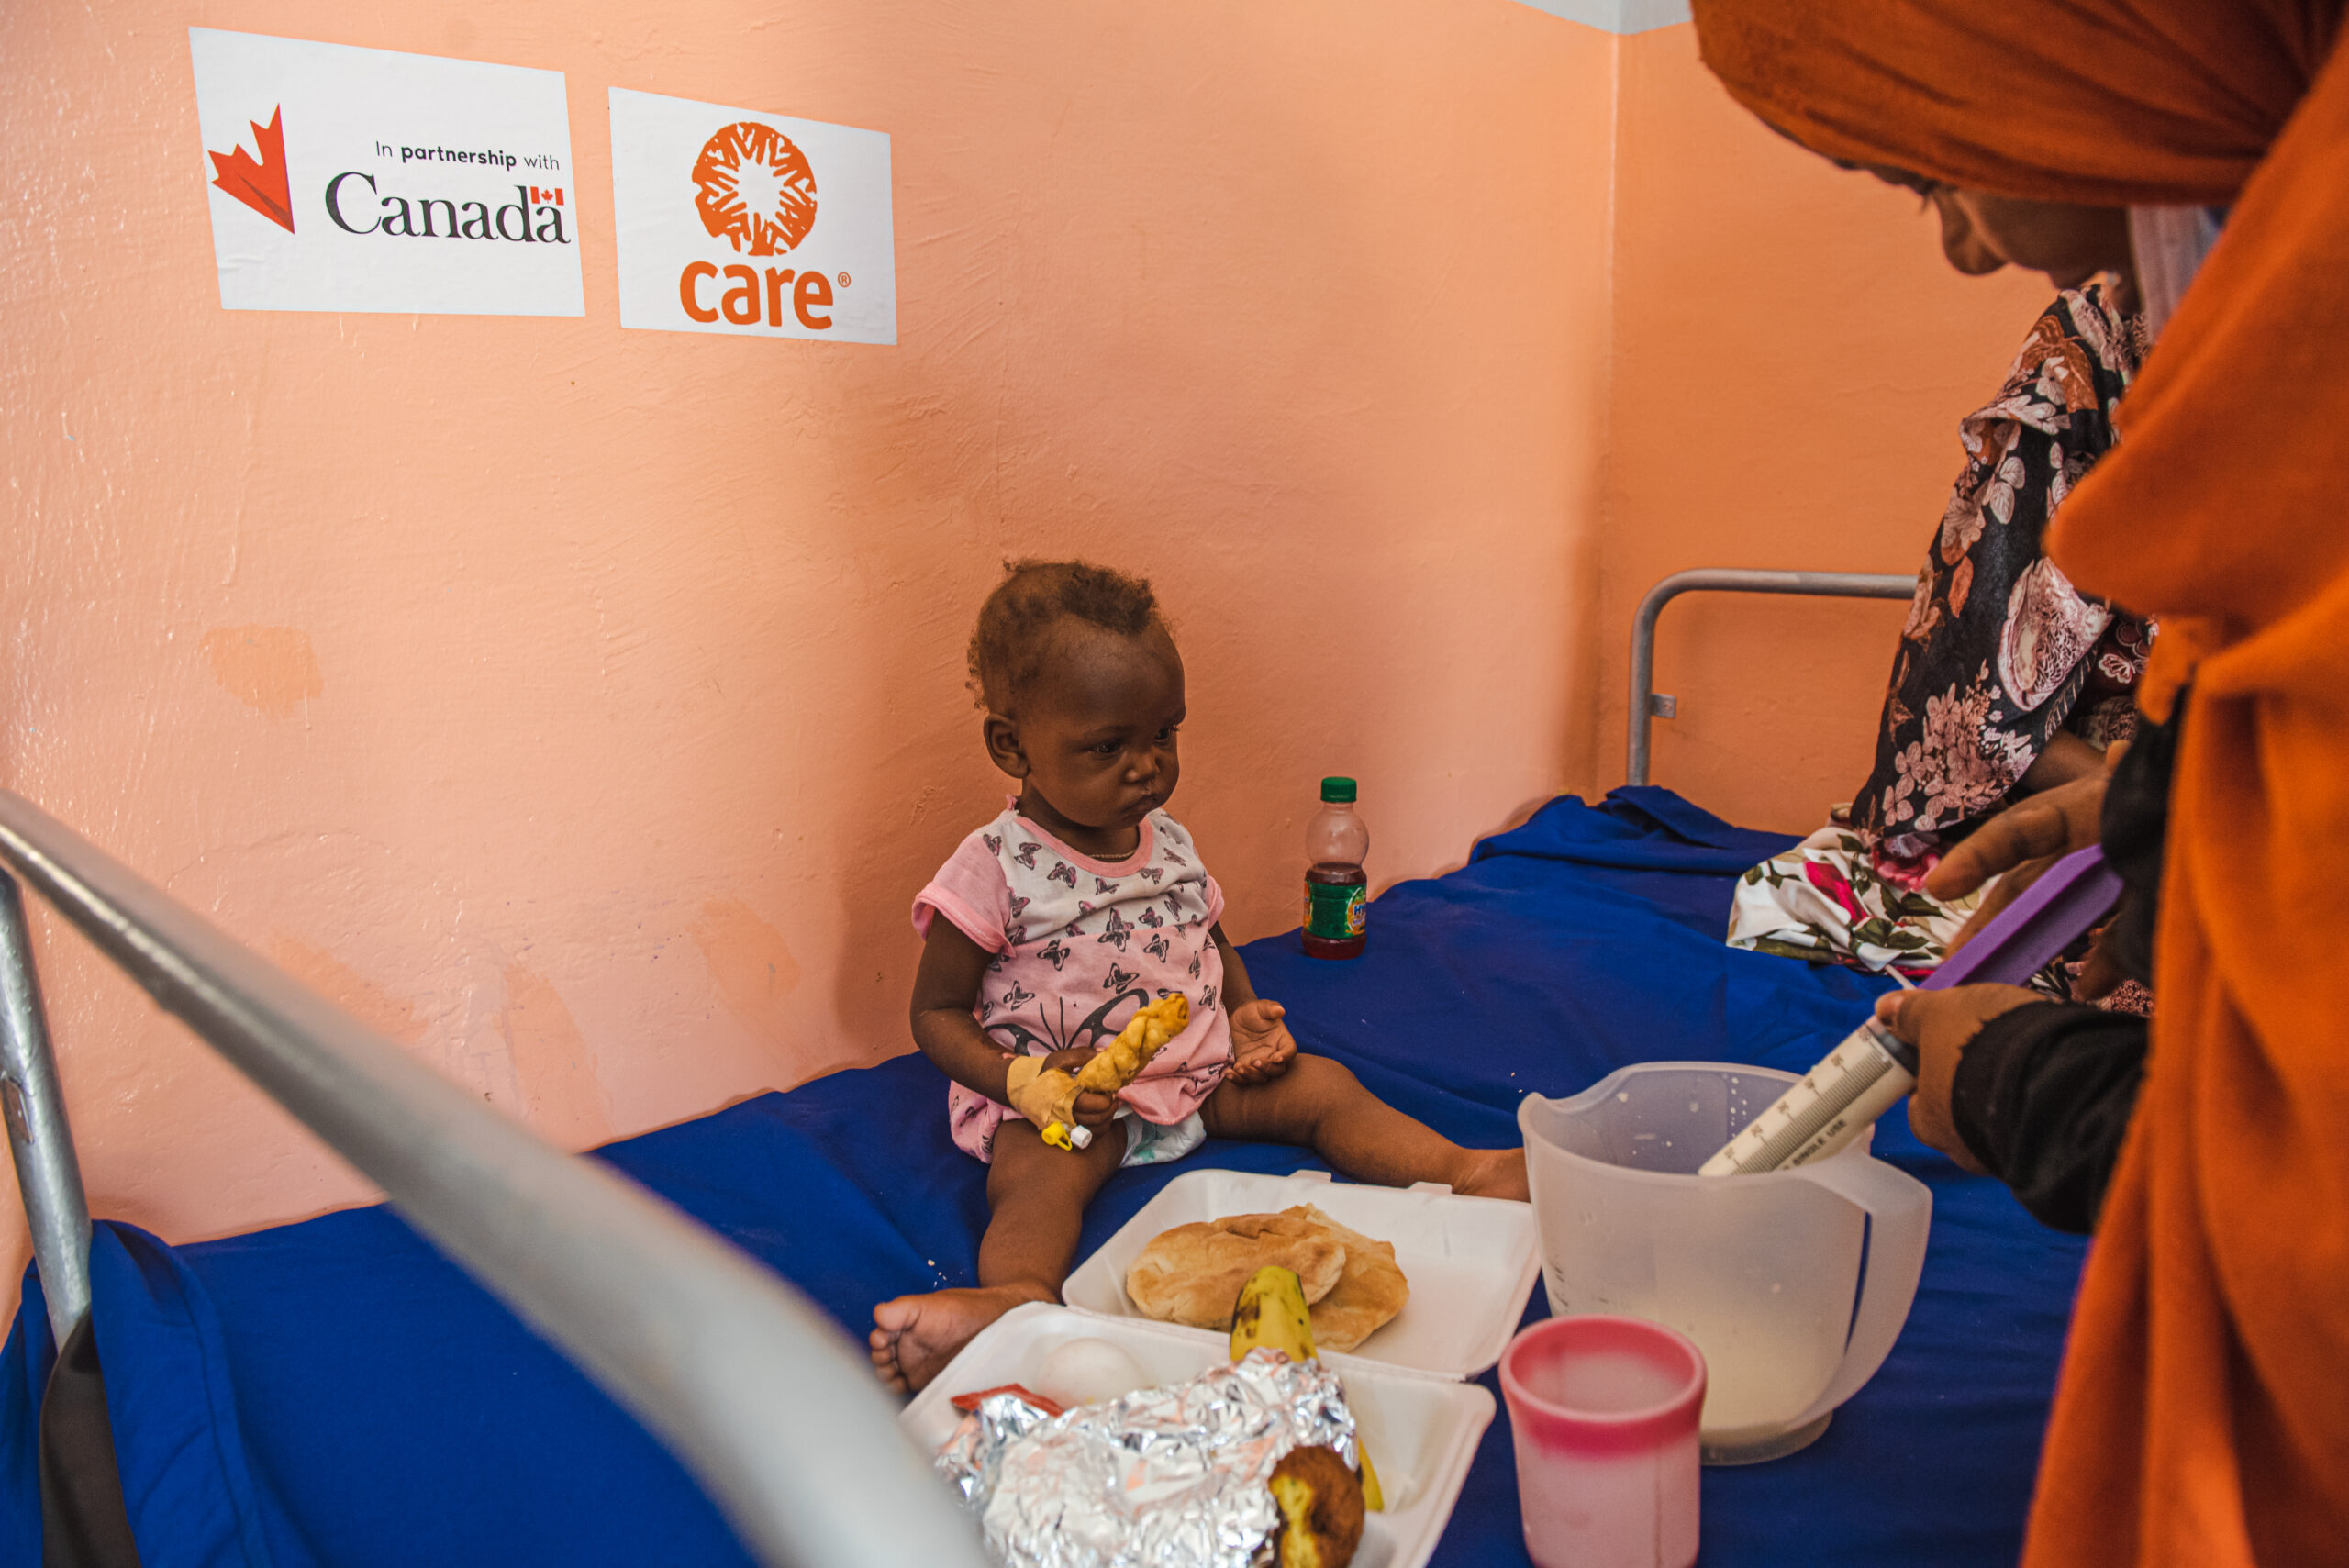 An infant sits on a hospital bed with food in front of her. She watches a woman who is standing beside the bed fill a large syringe with white liquid from a plastic container.